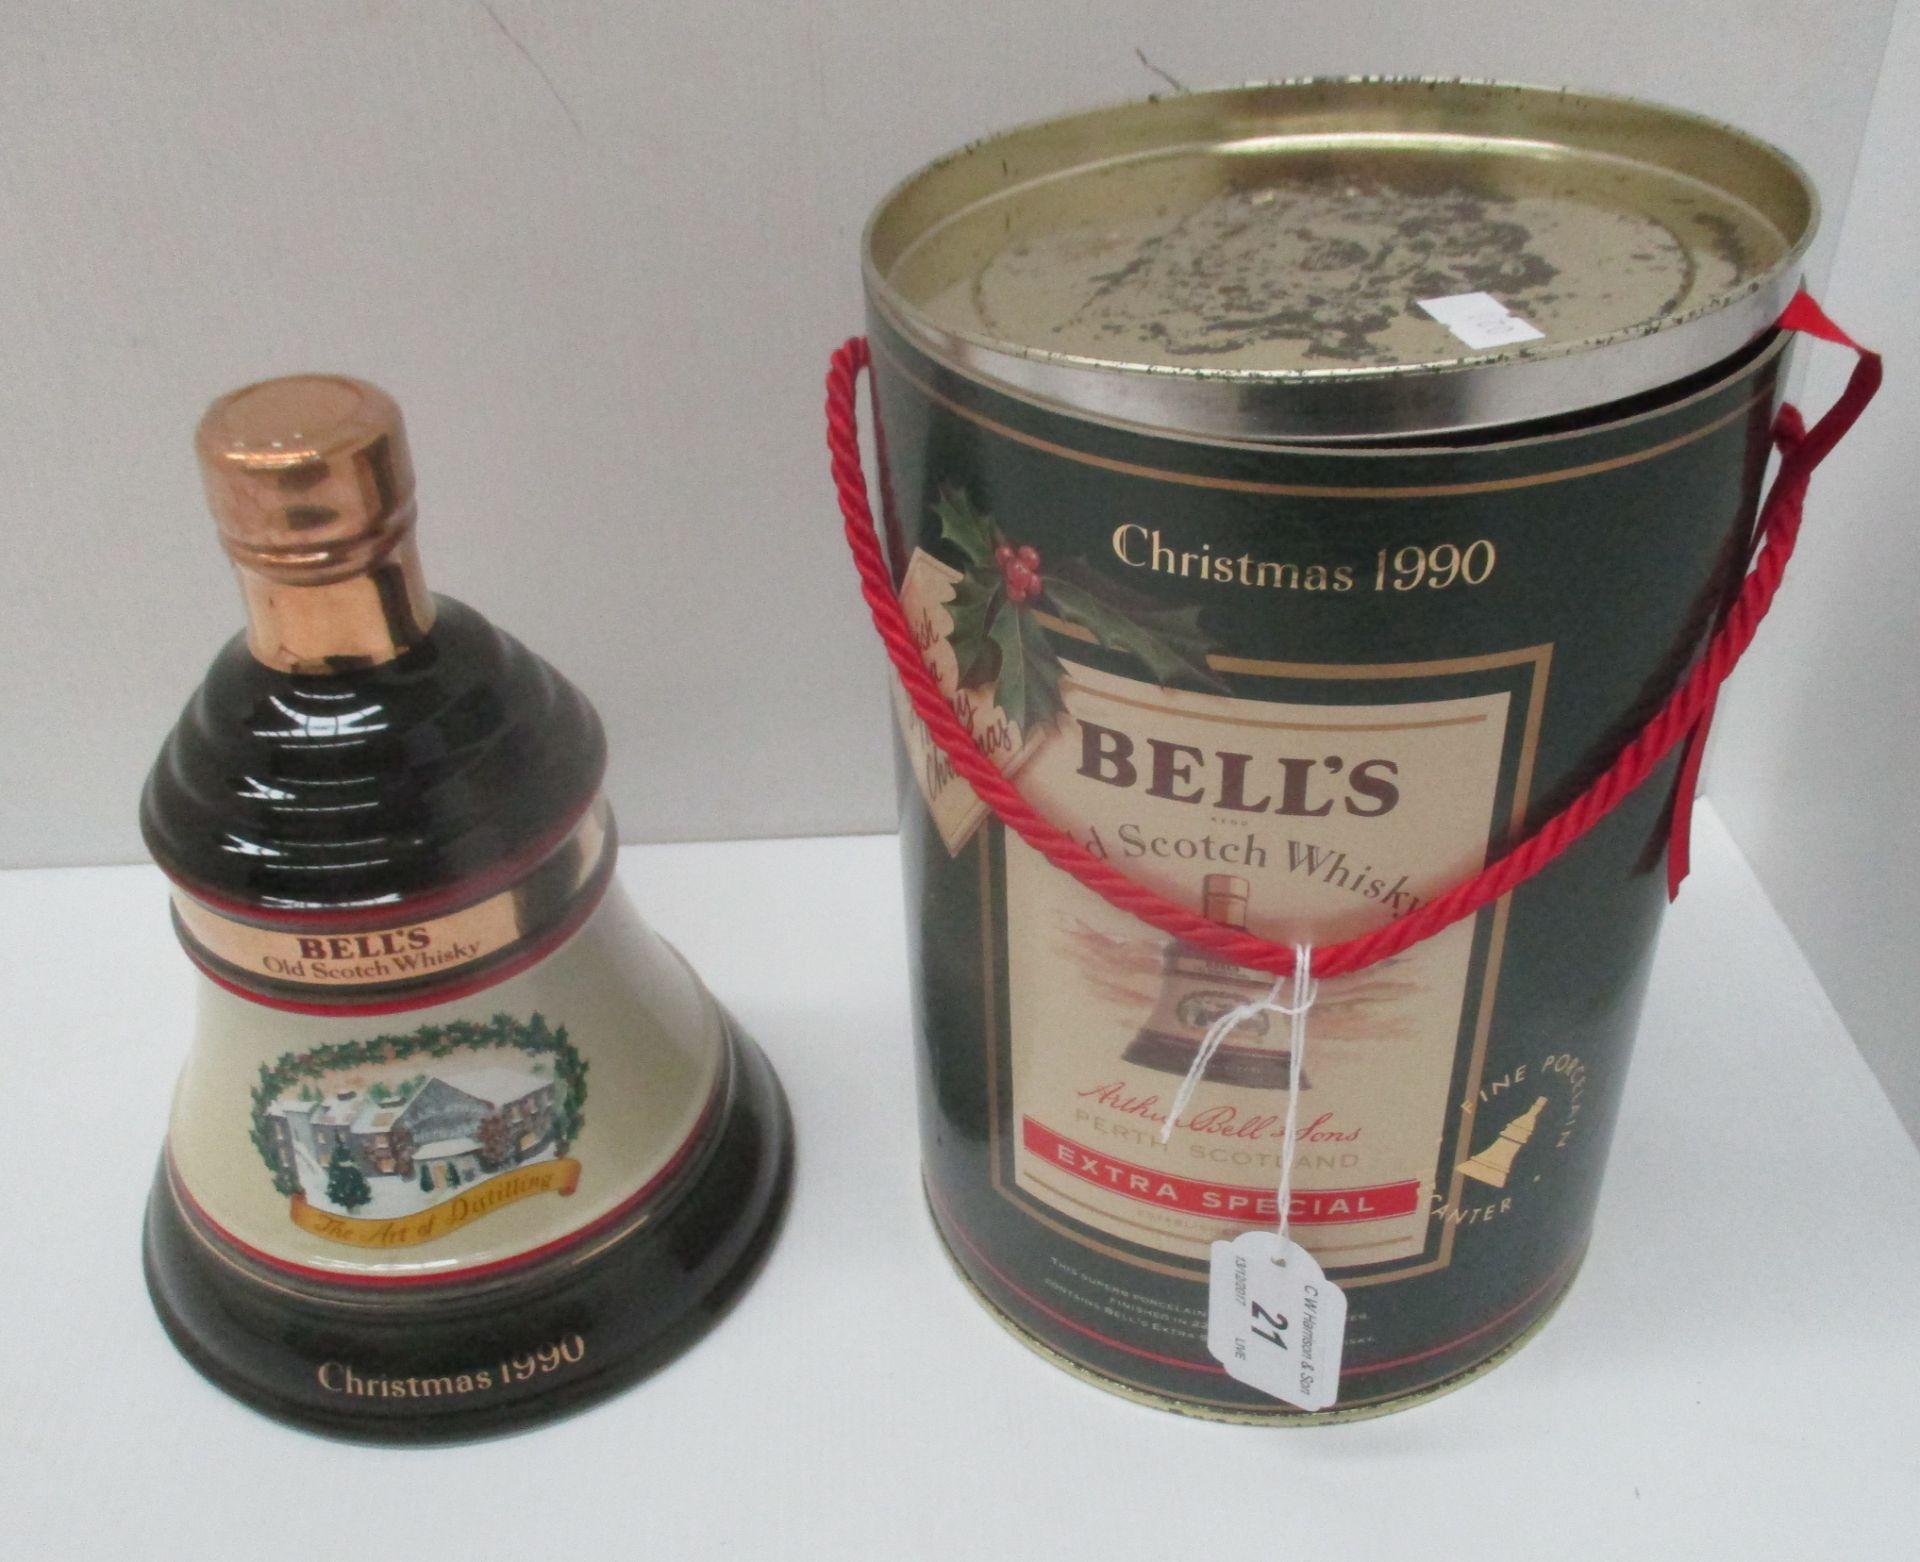 A 75cl Wade porcelain decanter containing Bell's Extra Special Old Scotch Whisky for Christmas 1990